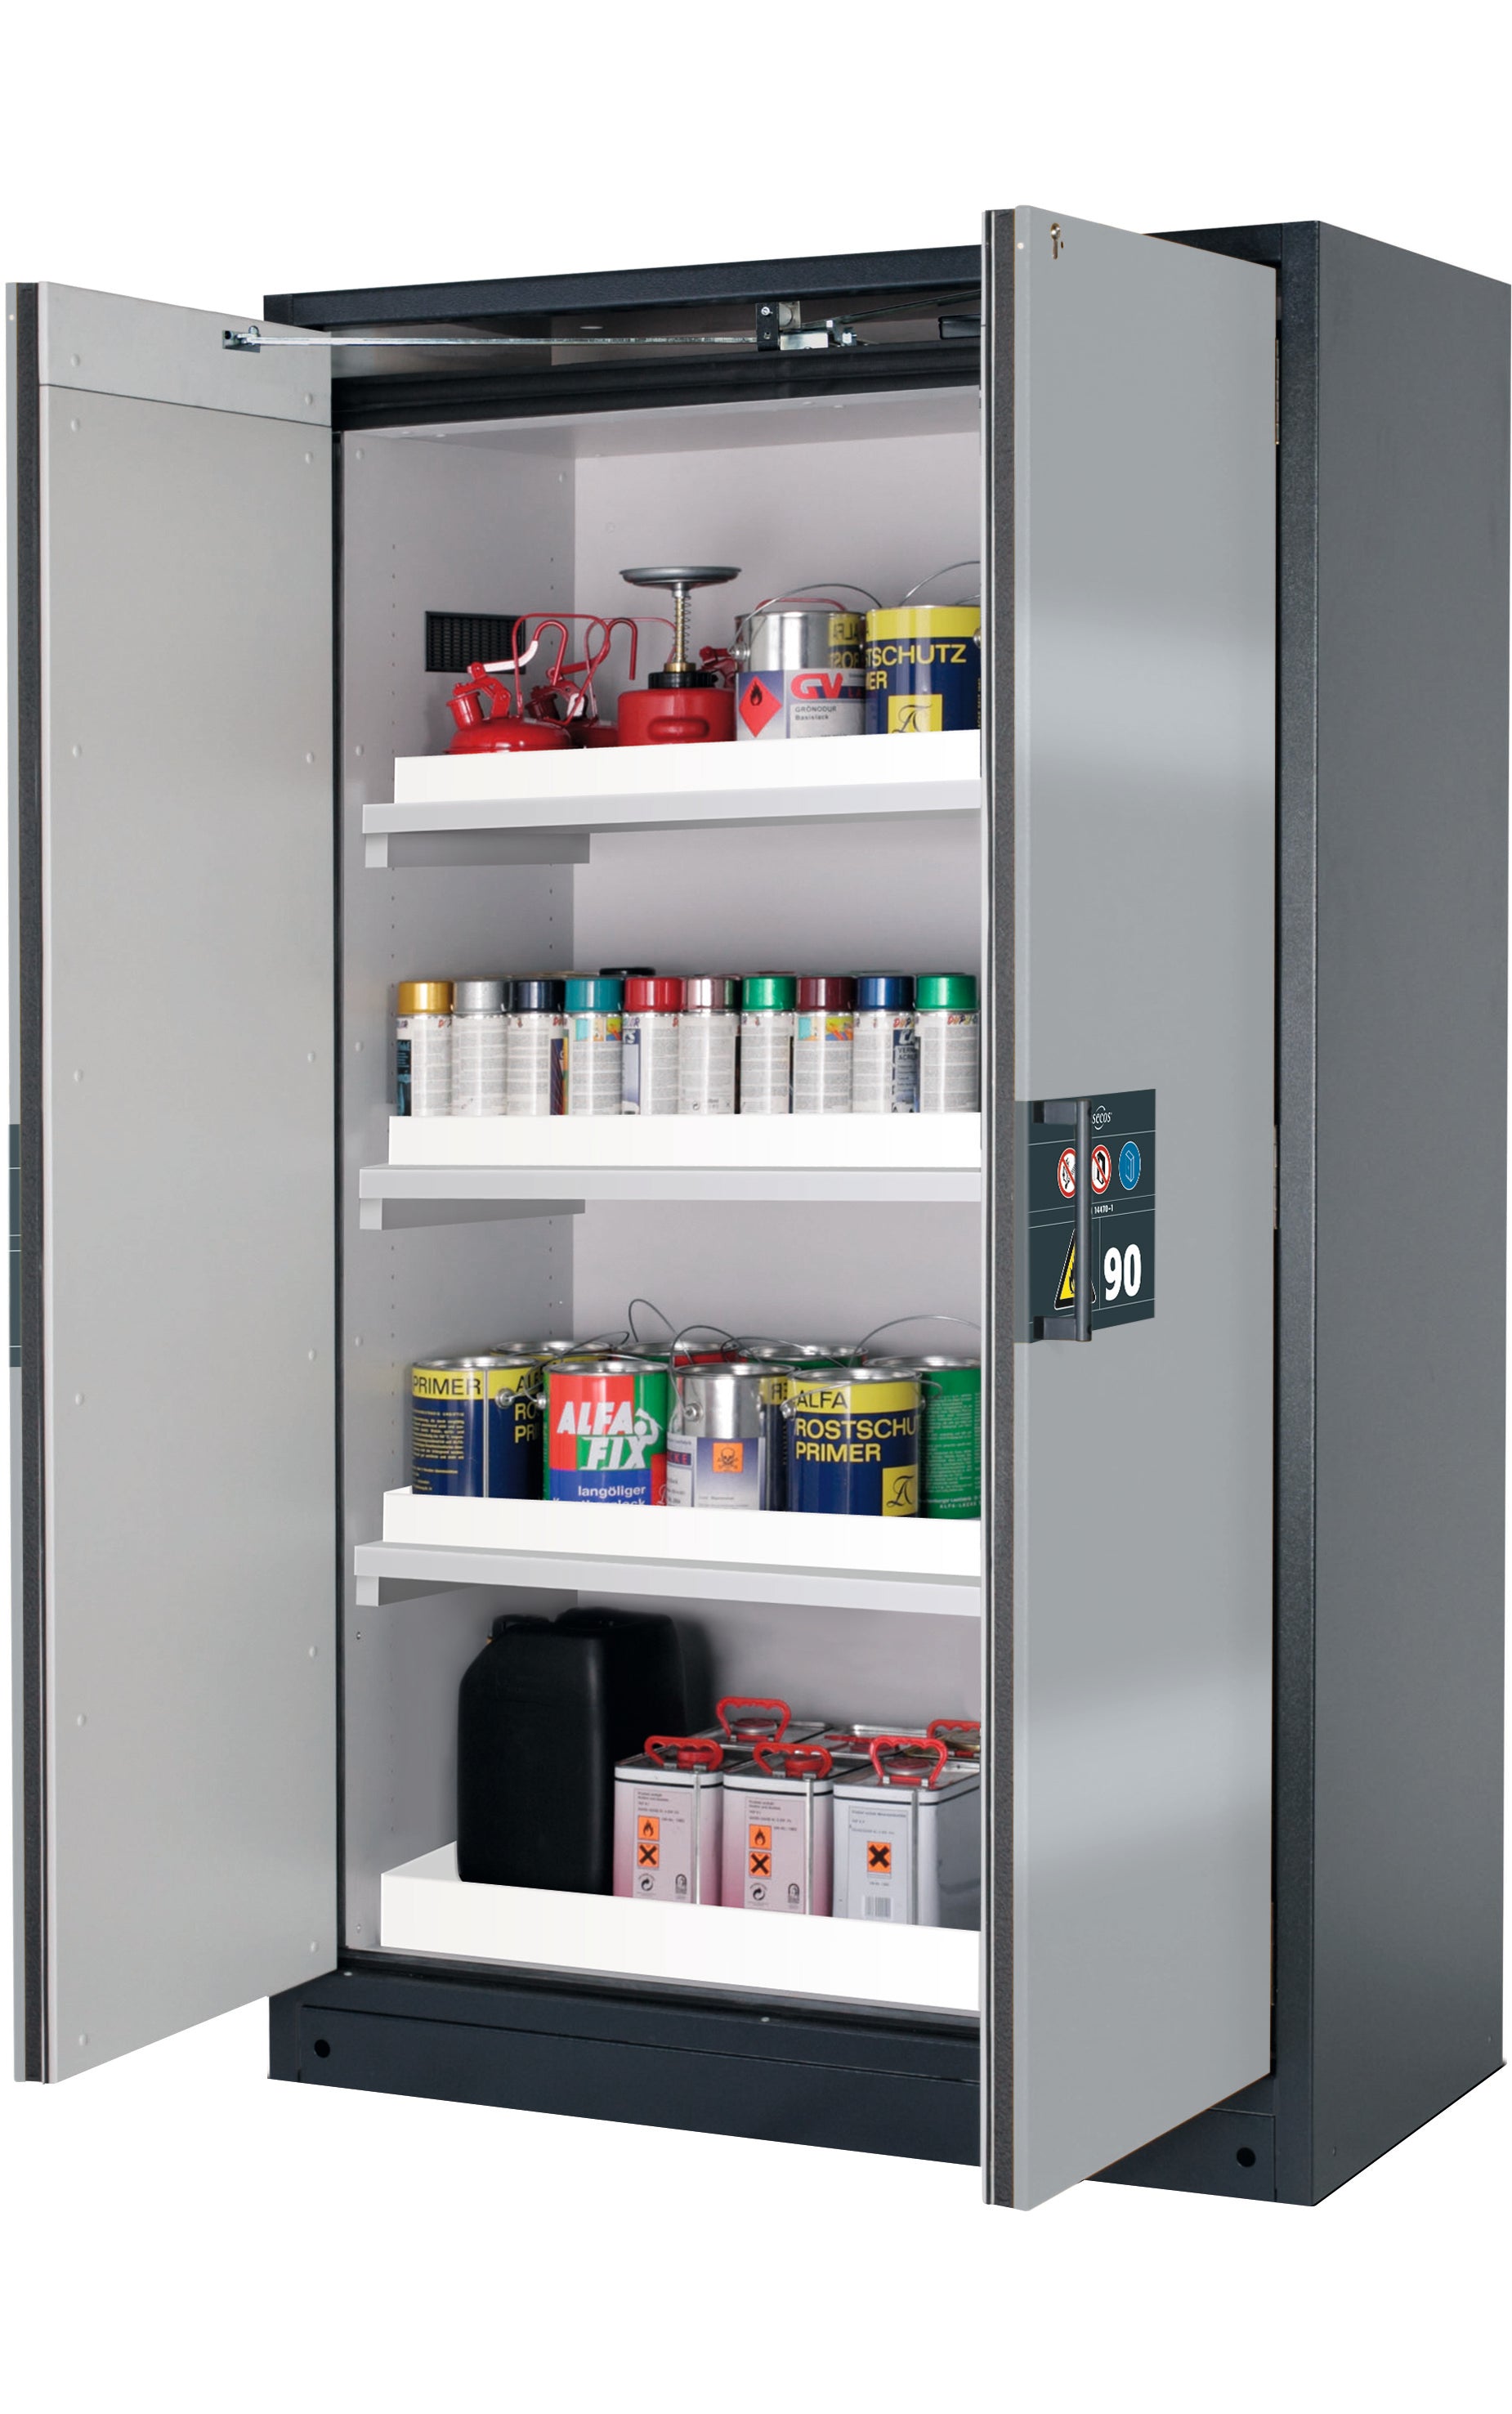 Type 90 safety storage cabinet Q-PEGASUS-90 model Q90.195.120.WDAC in asecos silver with 3x tray shelf (standard) (polypropylene),